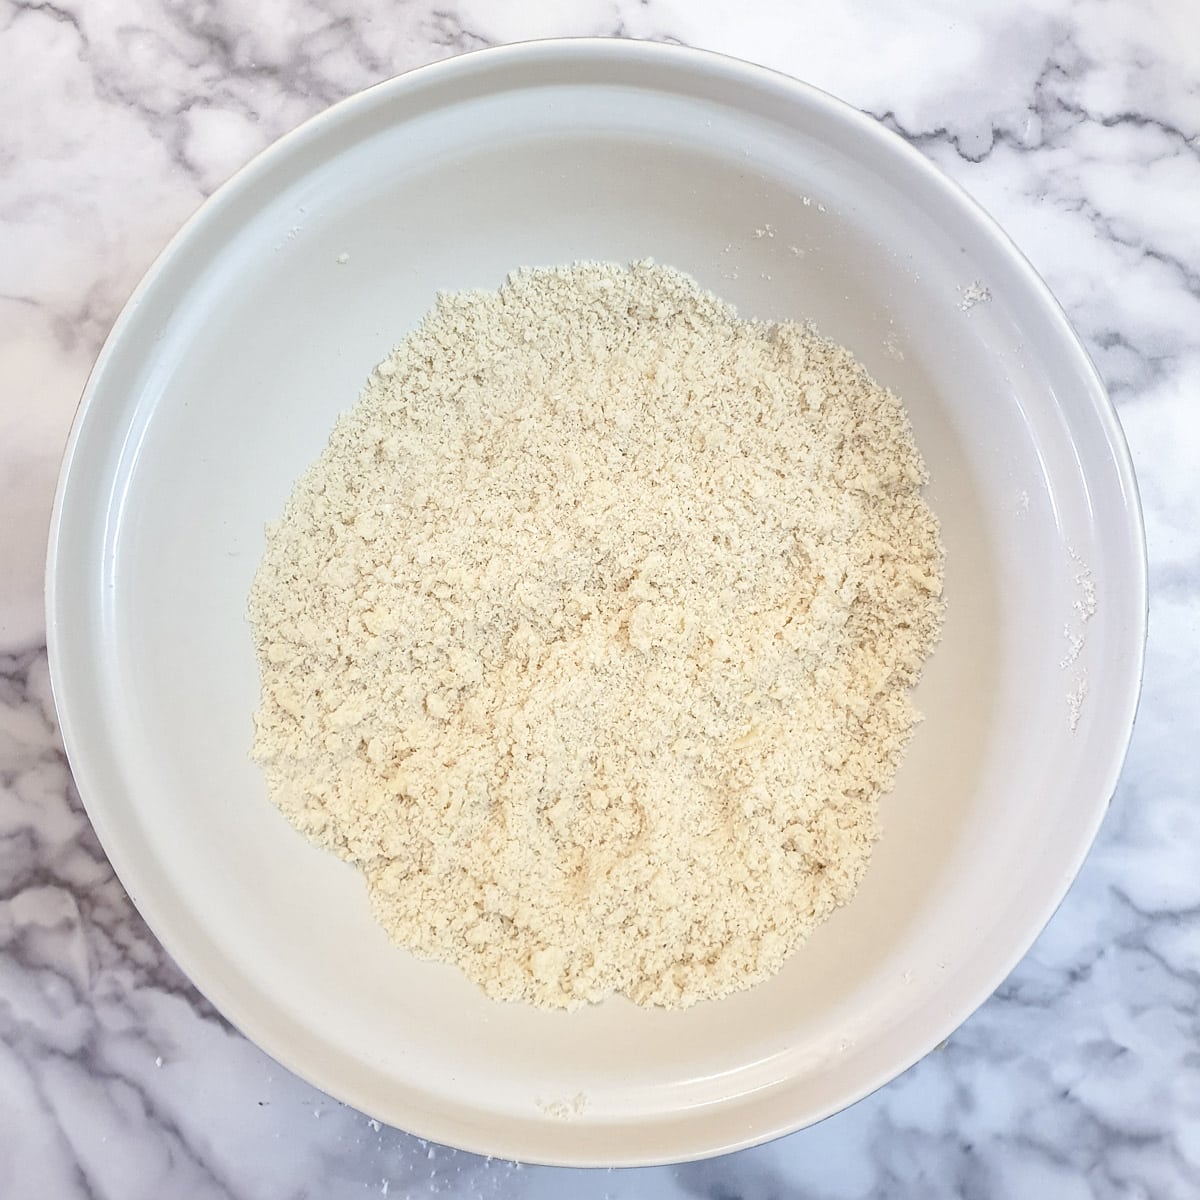 Flour and butter rubbed together to form 'breadcrumbs' in a mixing bowl.